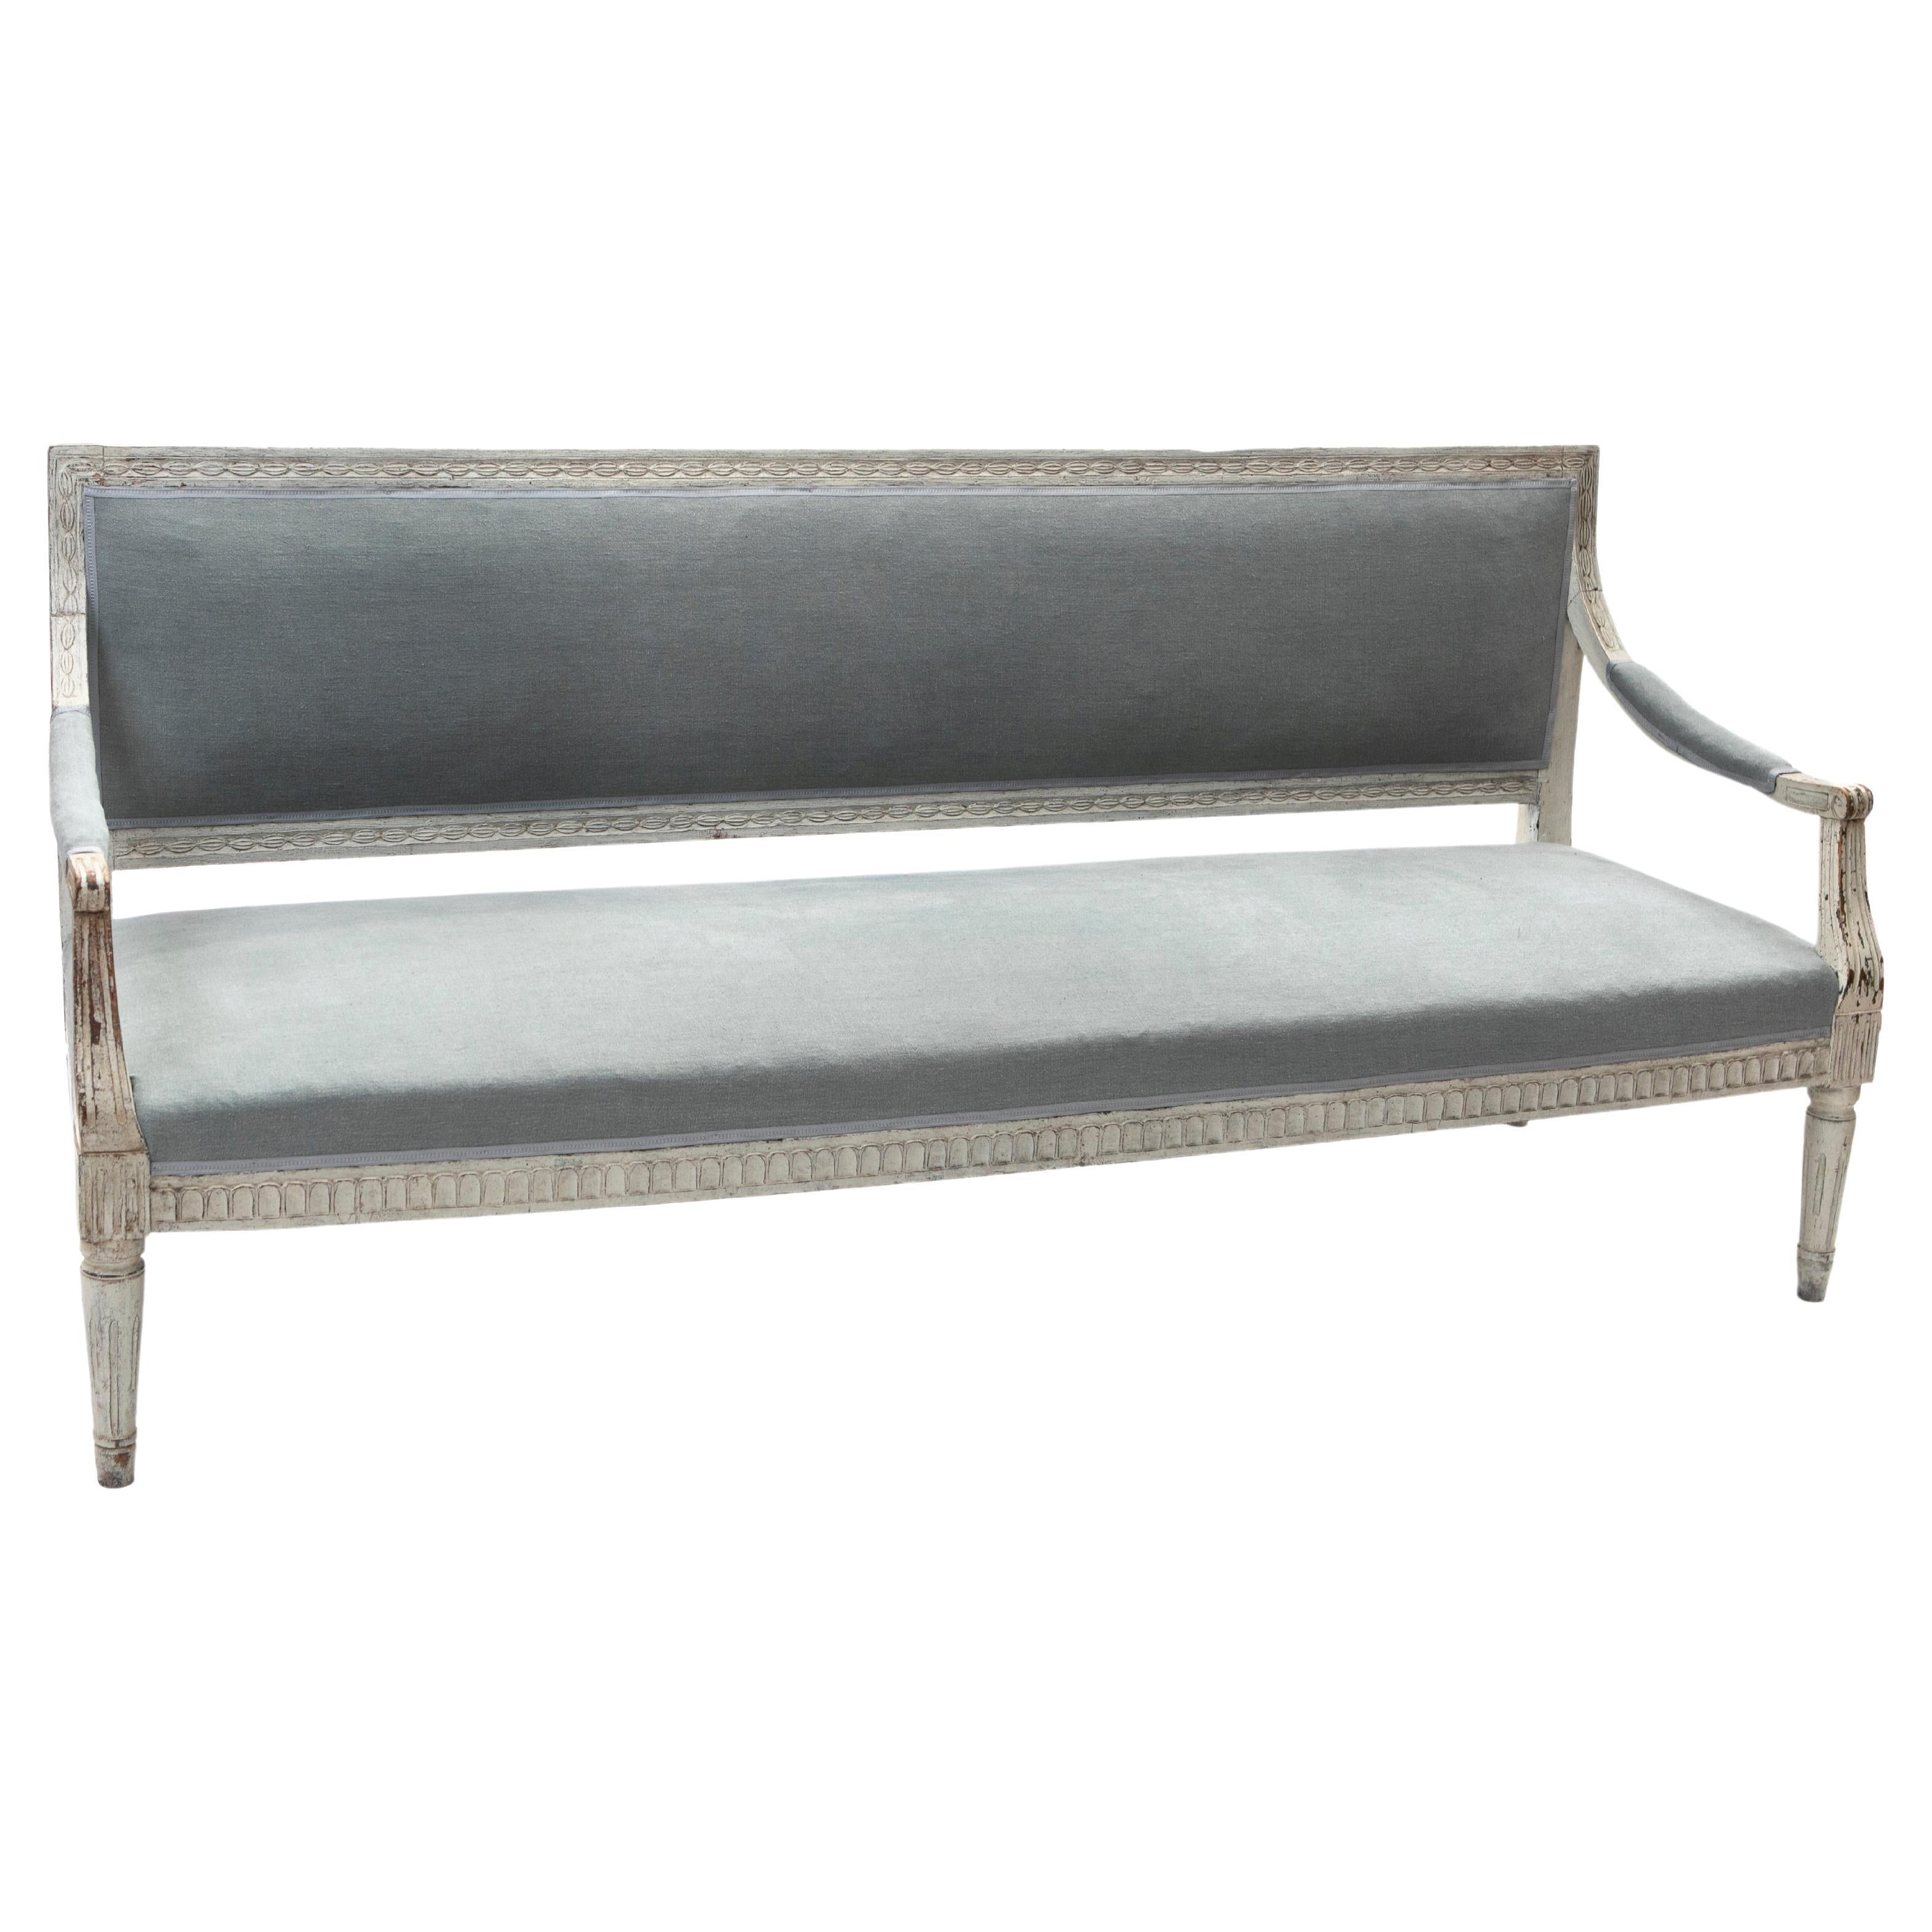 Swedish gustavian armed bench or sofa. 
Carved frame in light gray painted birchwood with natural age-related patina.

Features a long single seat with coil springs, upholstered with blue-gray sustainable hemp fabric from Les Créations de la